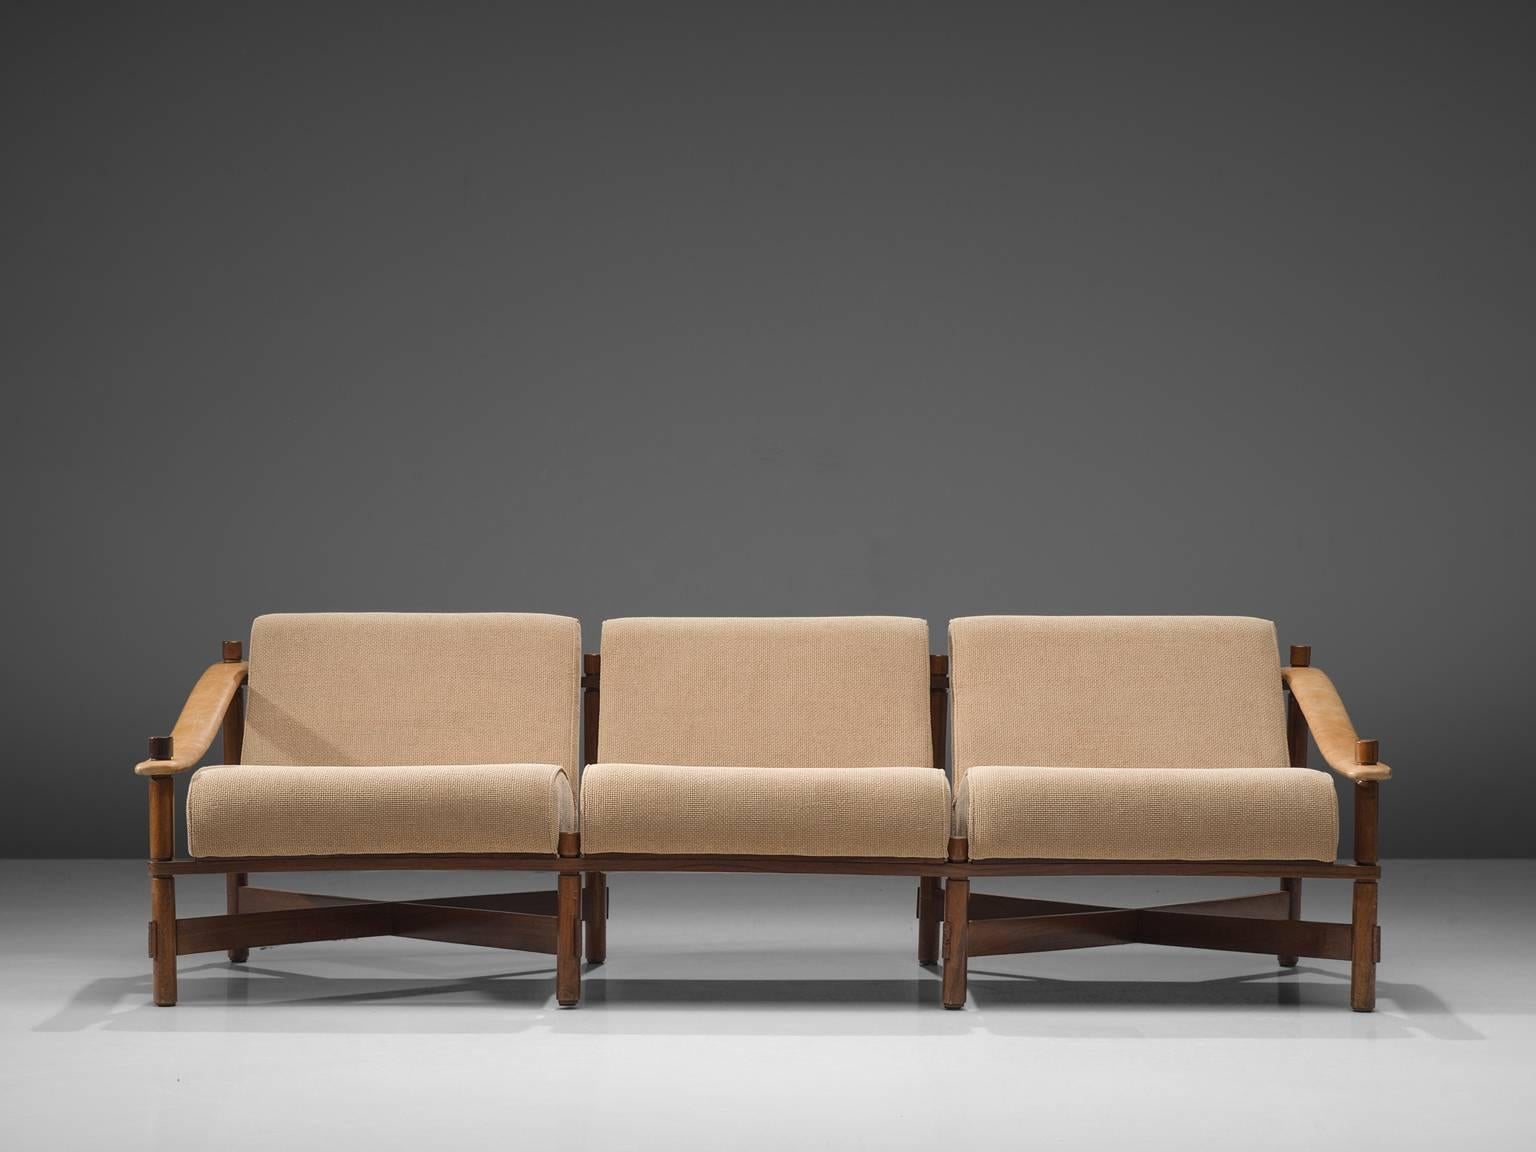 Brazilian Michel Arnoult Sofa in Solid Rosewood and Leather Arms